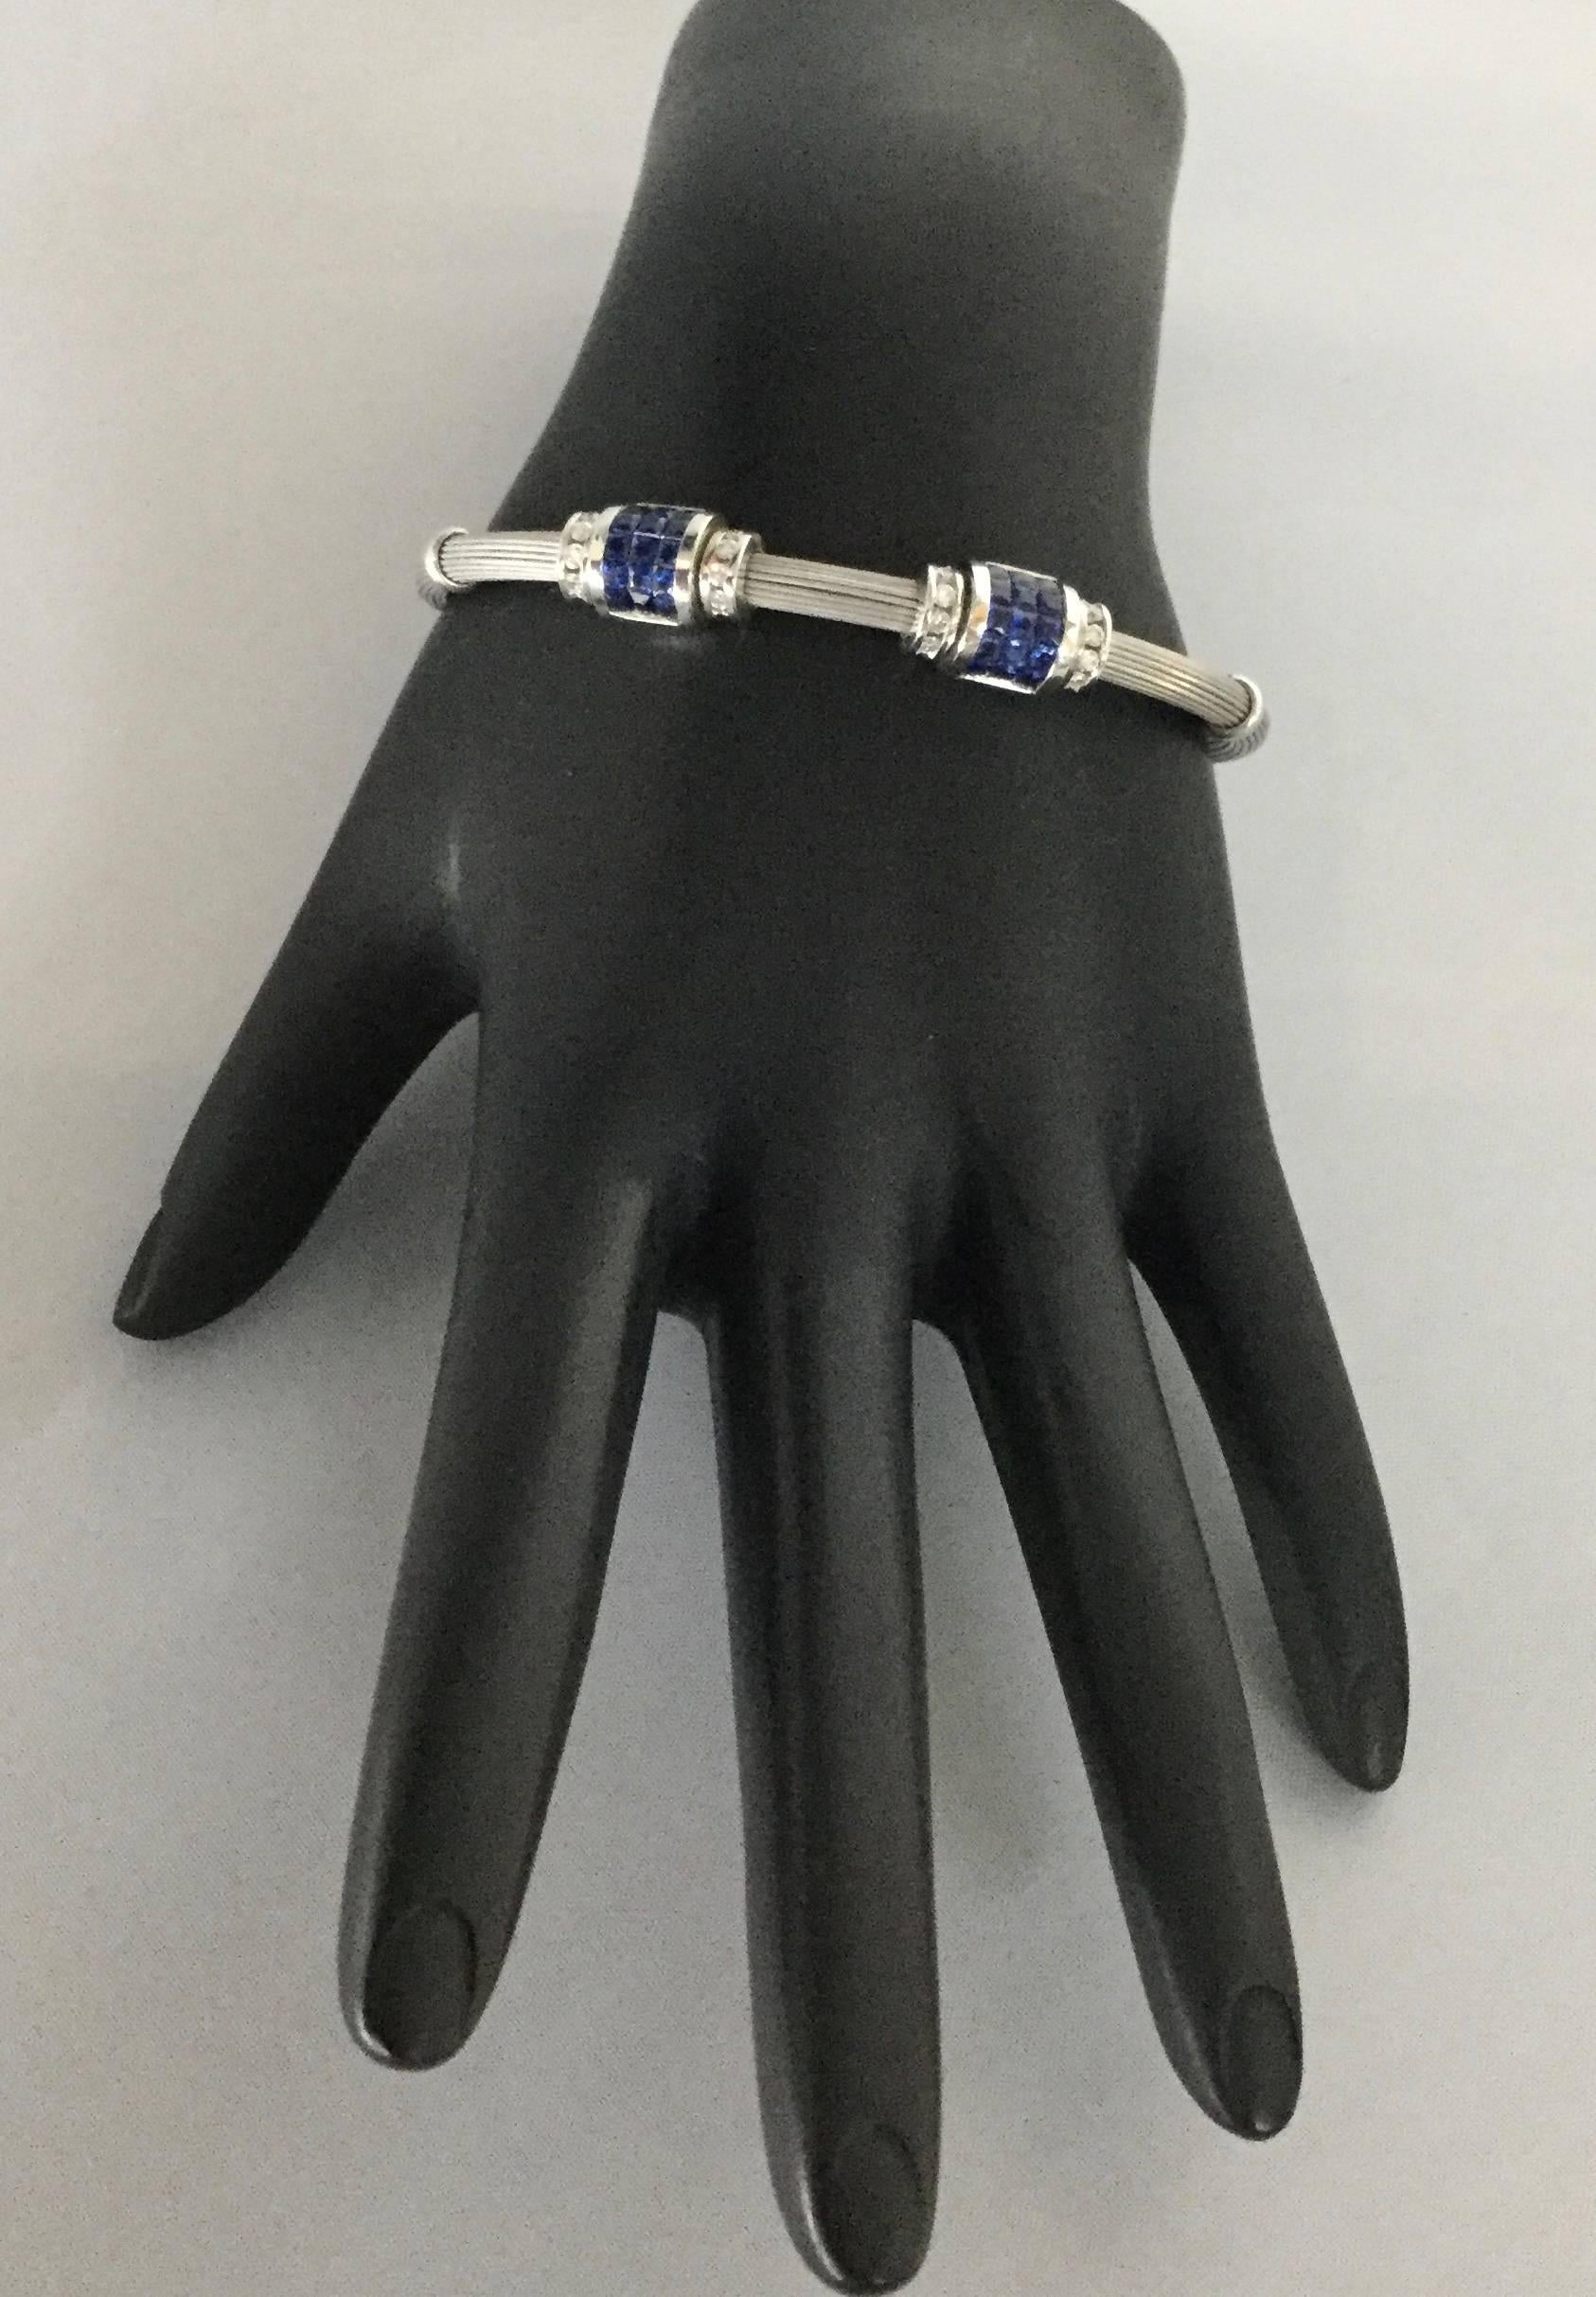 18K white gold flexible cable cuff bracelet with two sapphire and diamond stations. The bracelet contains 30 princess cut invisible set sapphires weighing combined 0.75 carat and 16 round diamonds weighing combined 0.38 carat.
